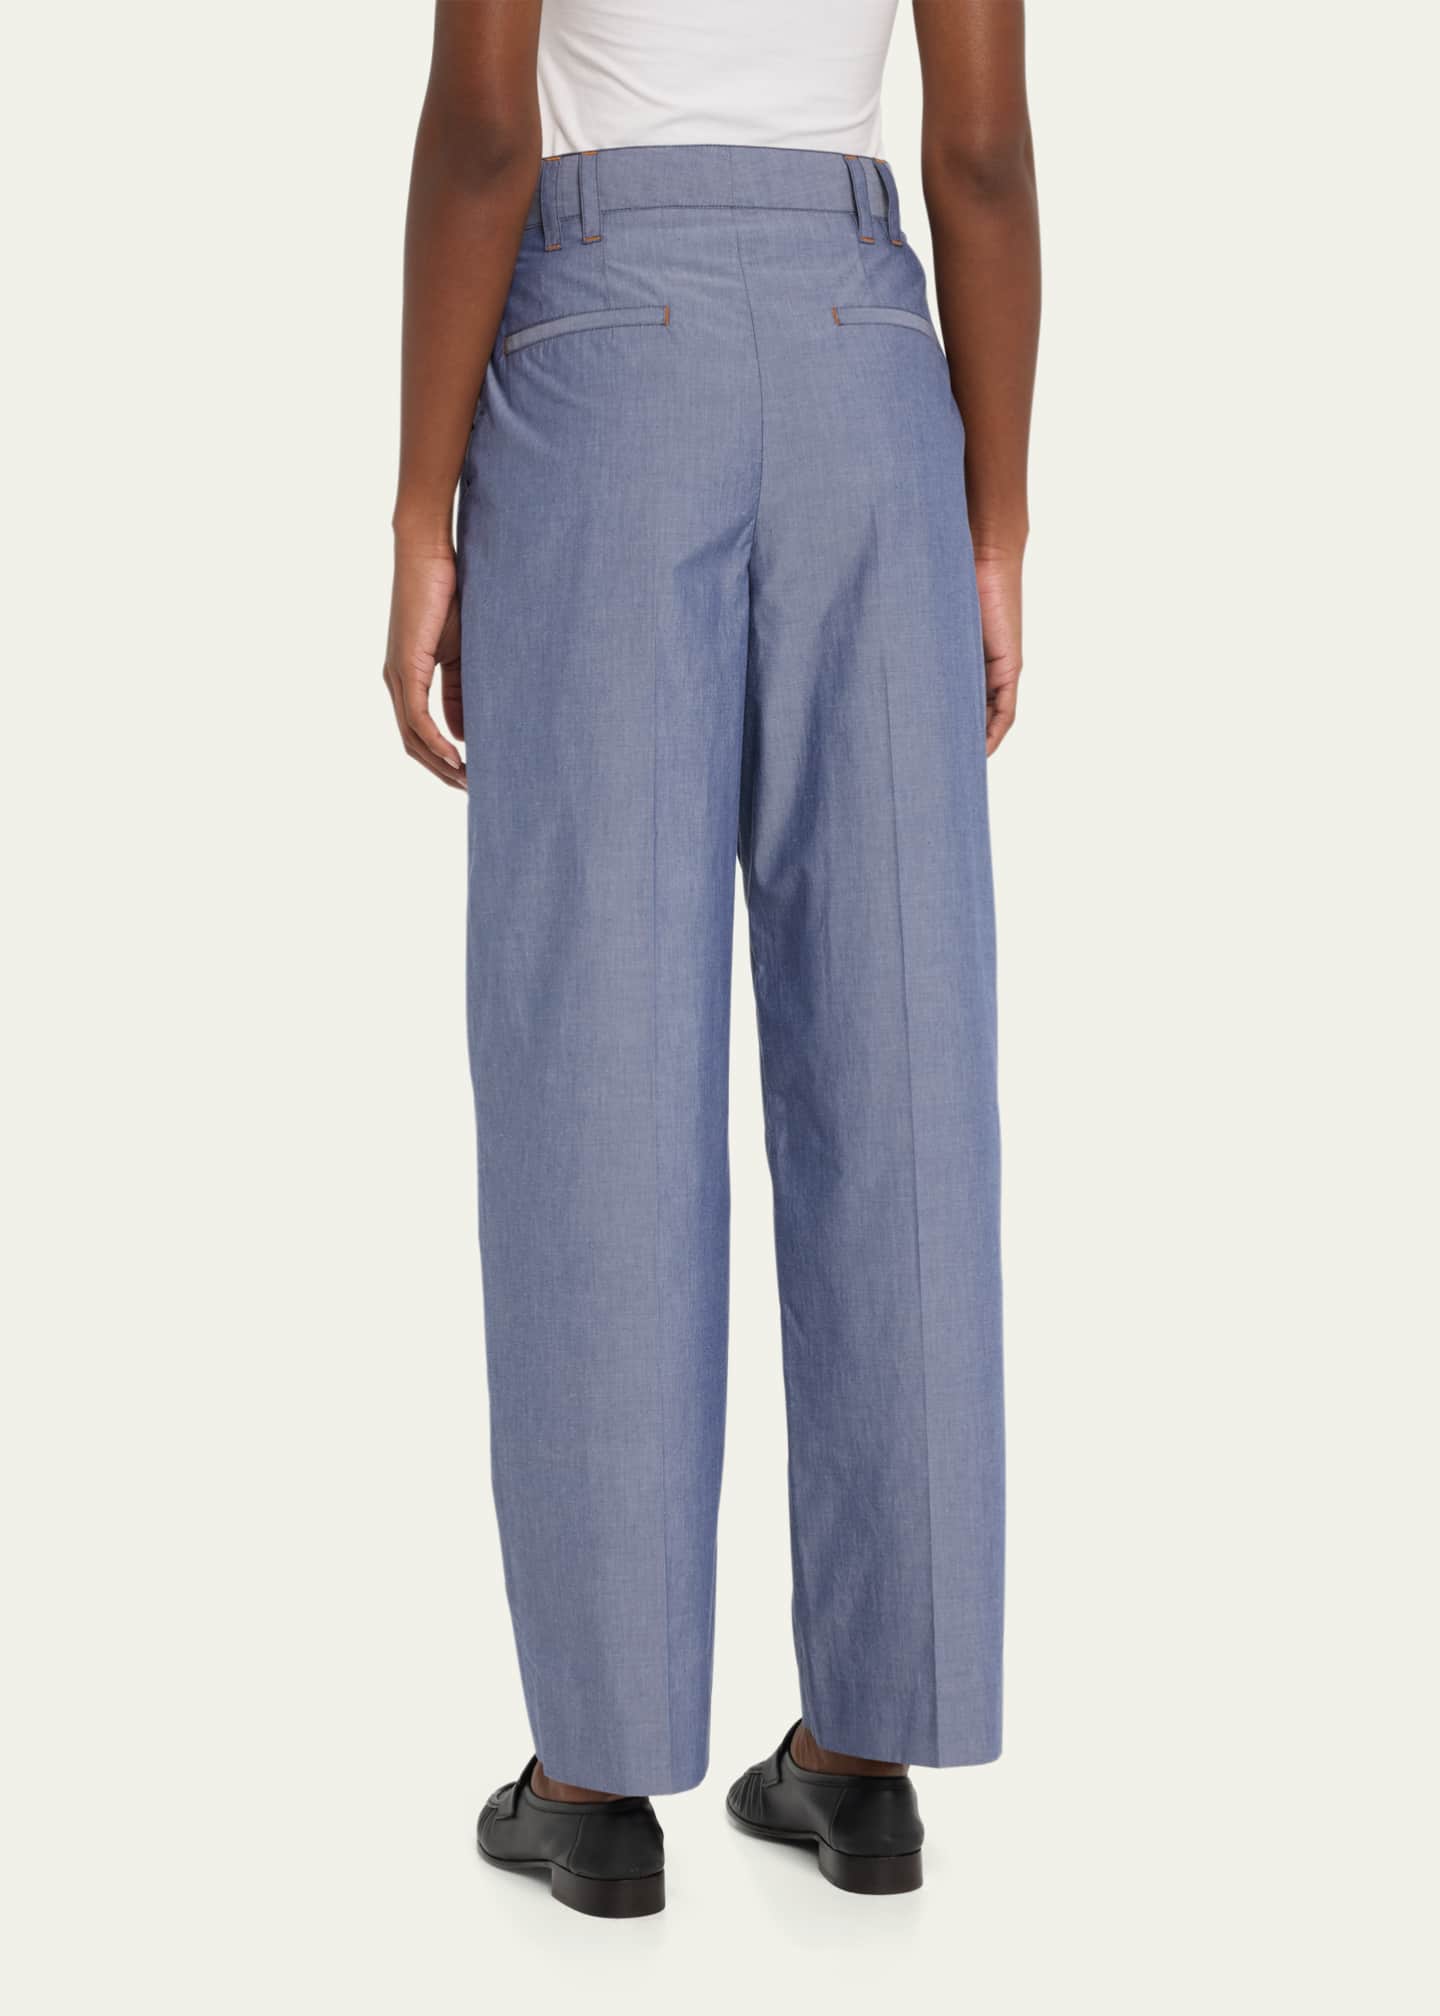 MARIA MCMANUS Chambray Double Pleat Front Trousers - Bergdorf Goodman